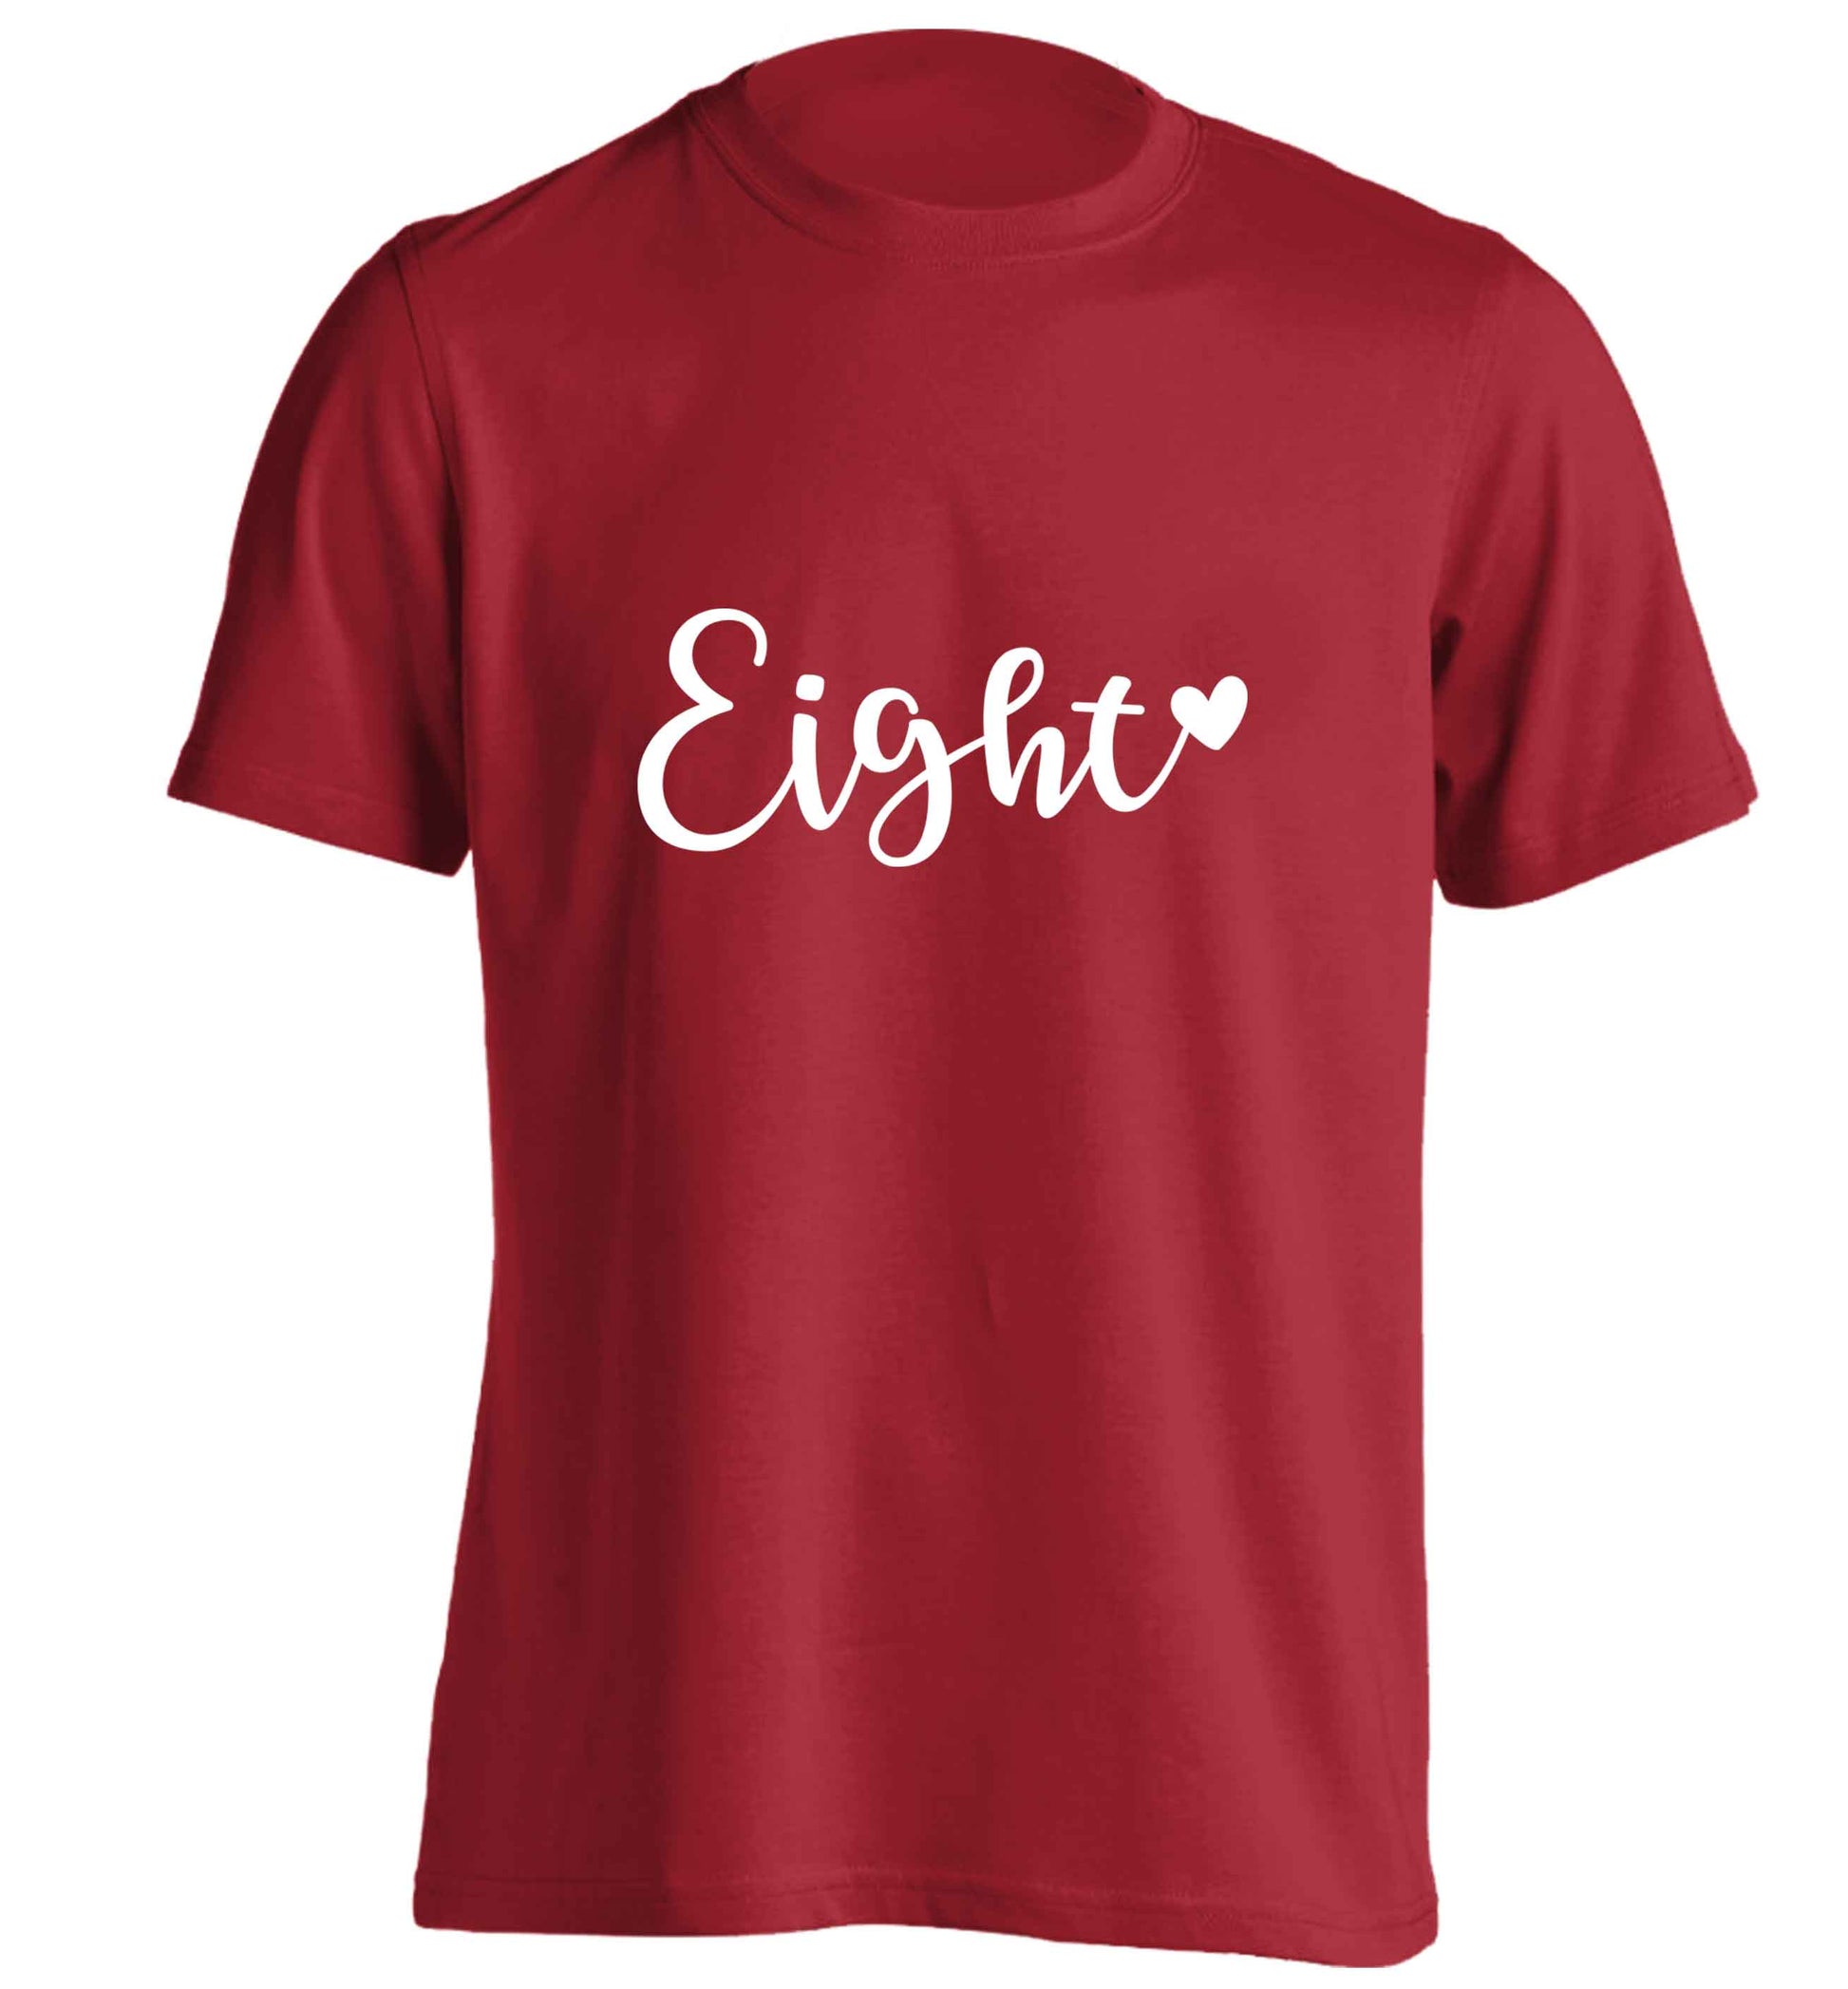 Eight and heart adults unisex red Tshirt 2XL